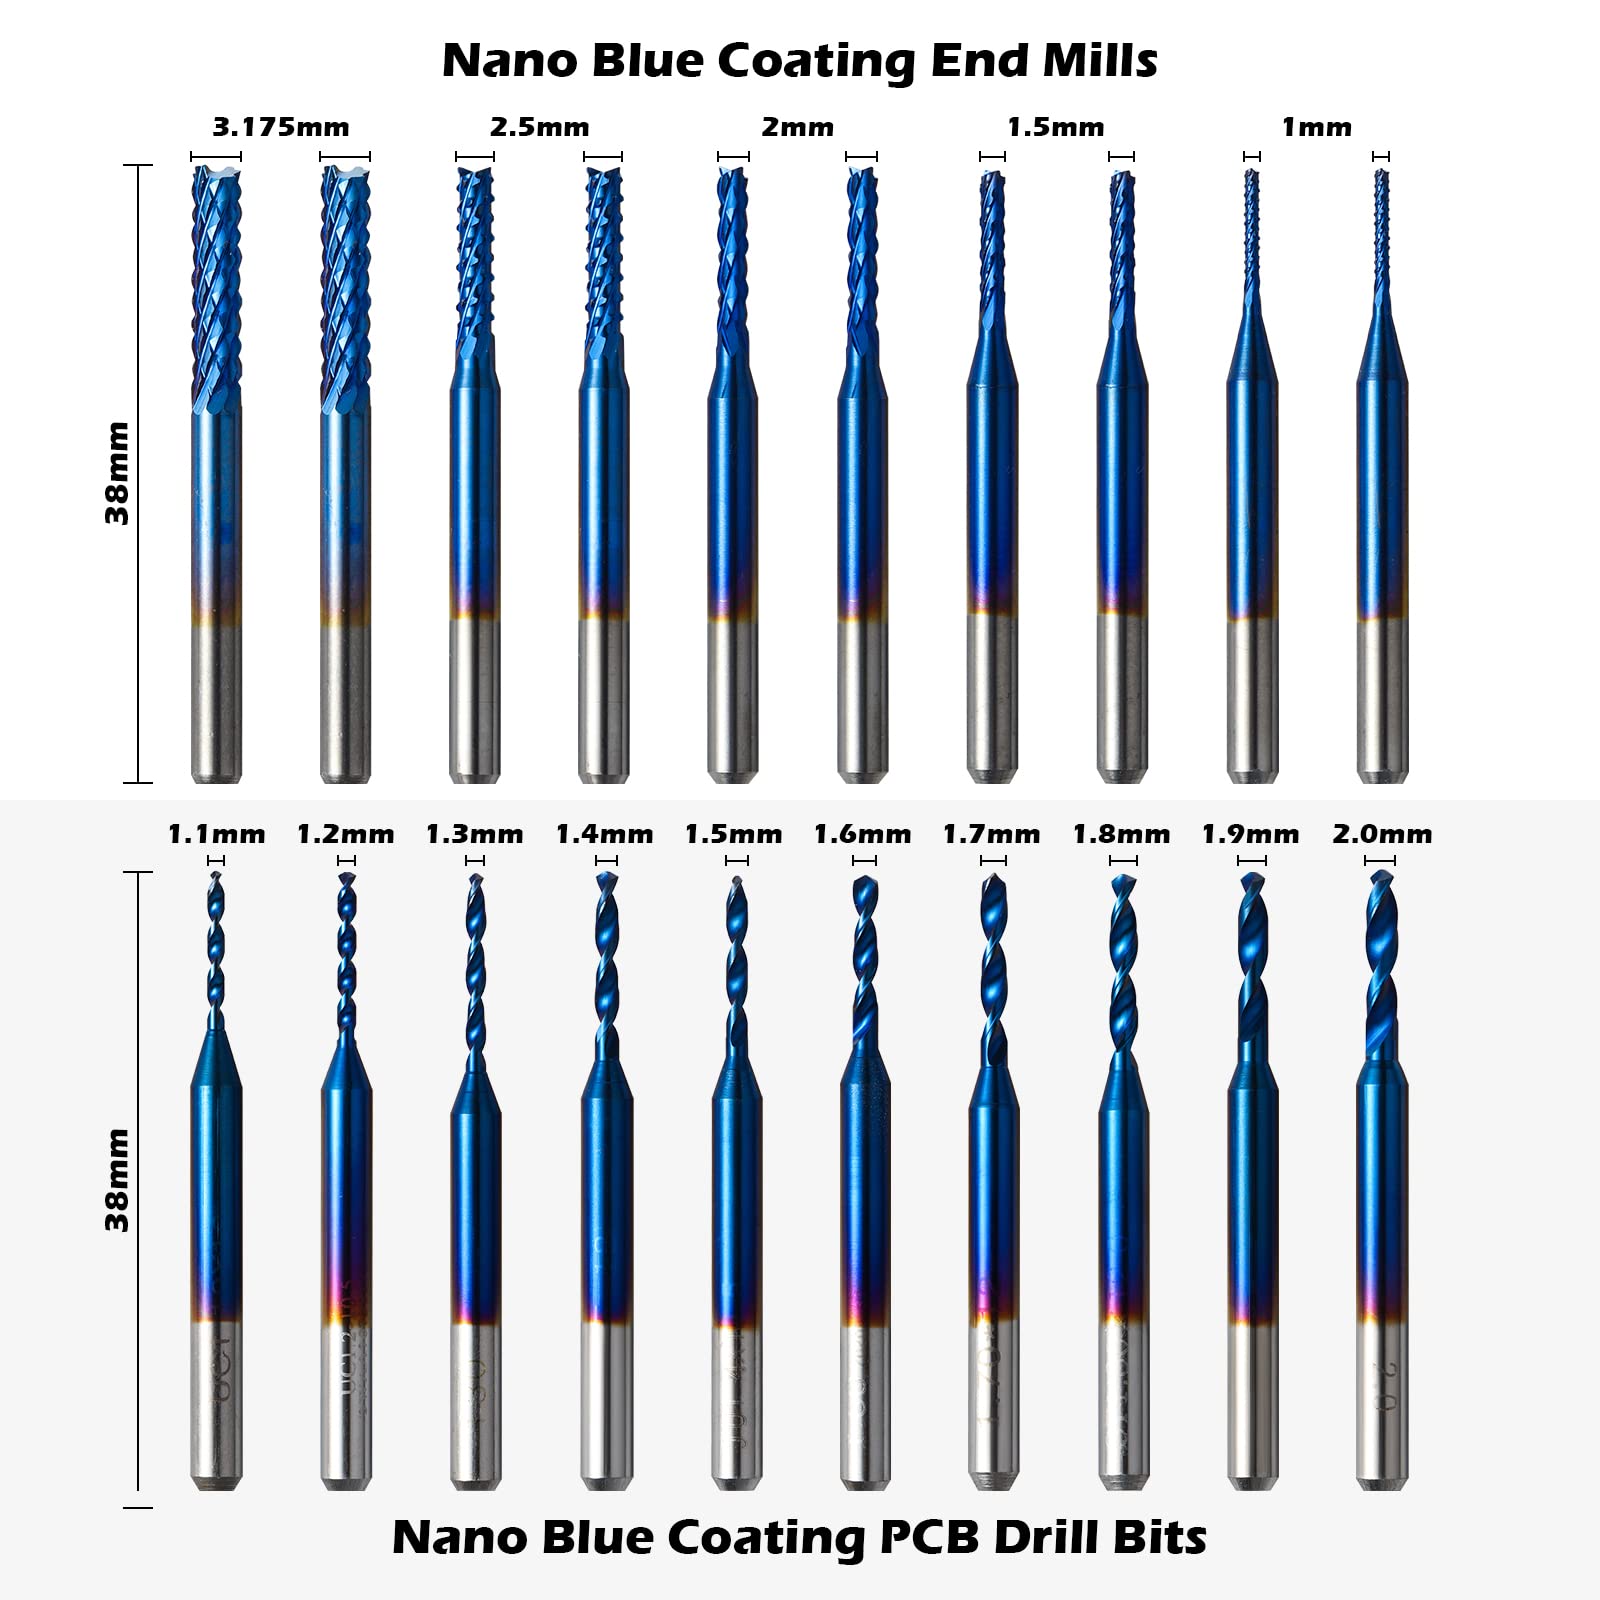 Genmitsu 50pcs Tungsten Carbide End Mill Router Bits, 1/8'' Shank CNC Bit Set Including 2-Flute Straight Bit, Flat Nose & Ball Nose End Mill, PCB Drill & V-Groove Engraving Bits, Nano Blue Coat, MC50A